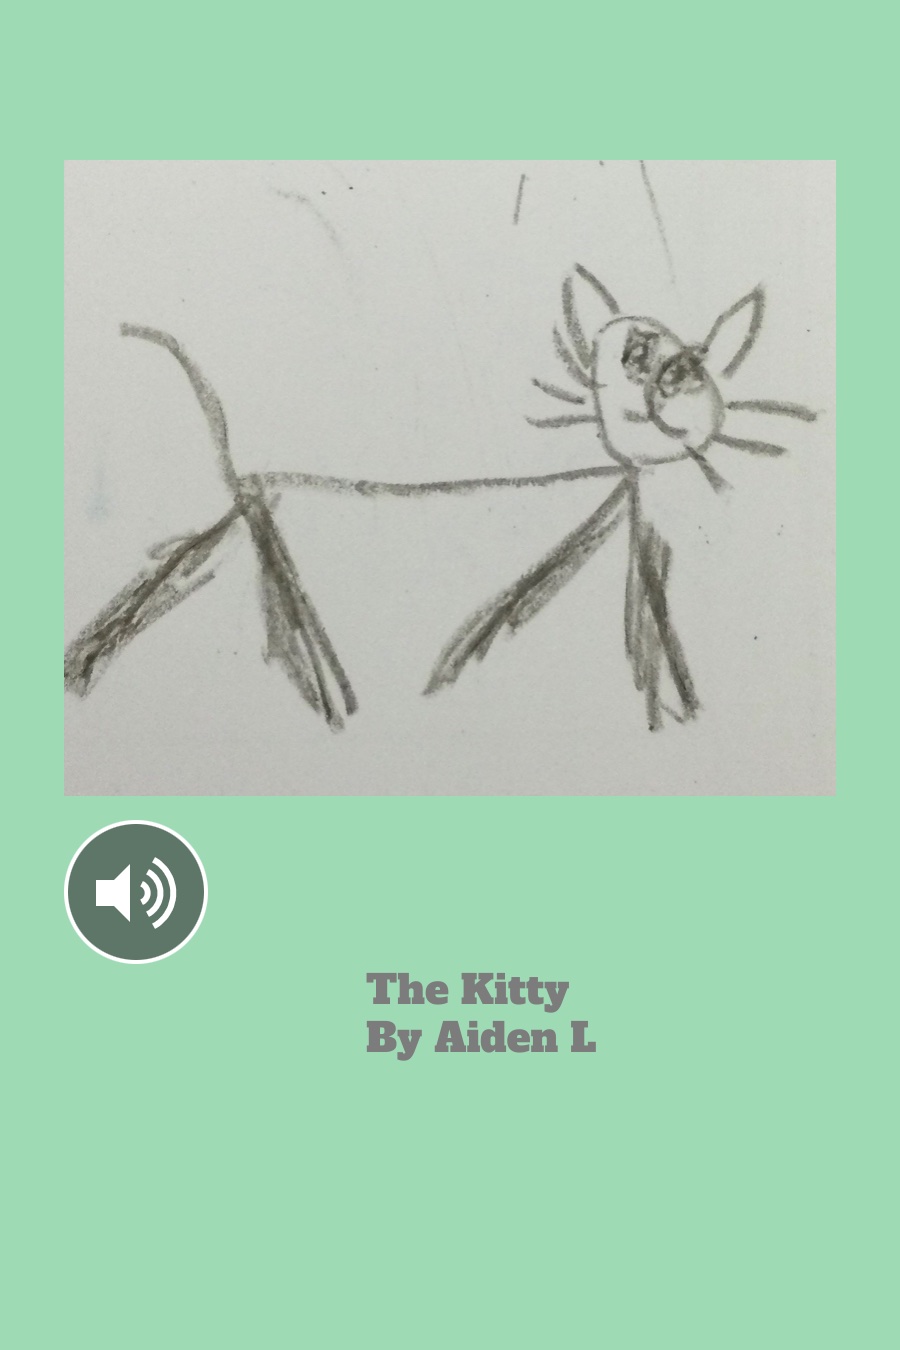 The Kitty by Aiden L